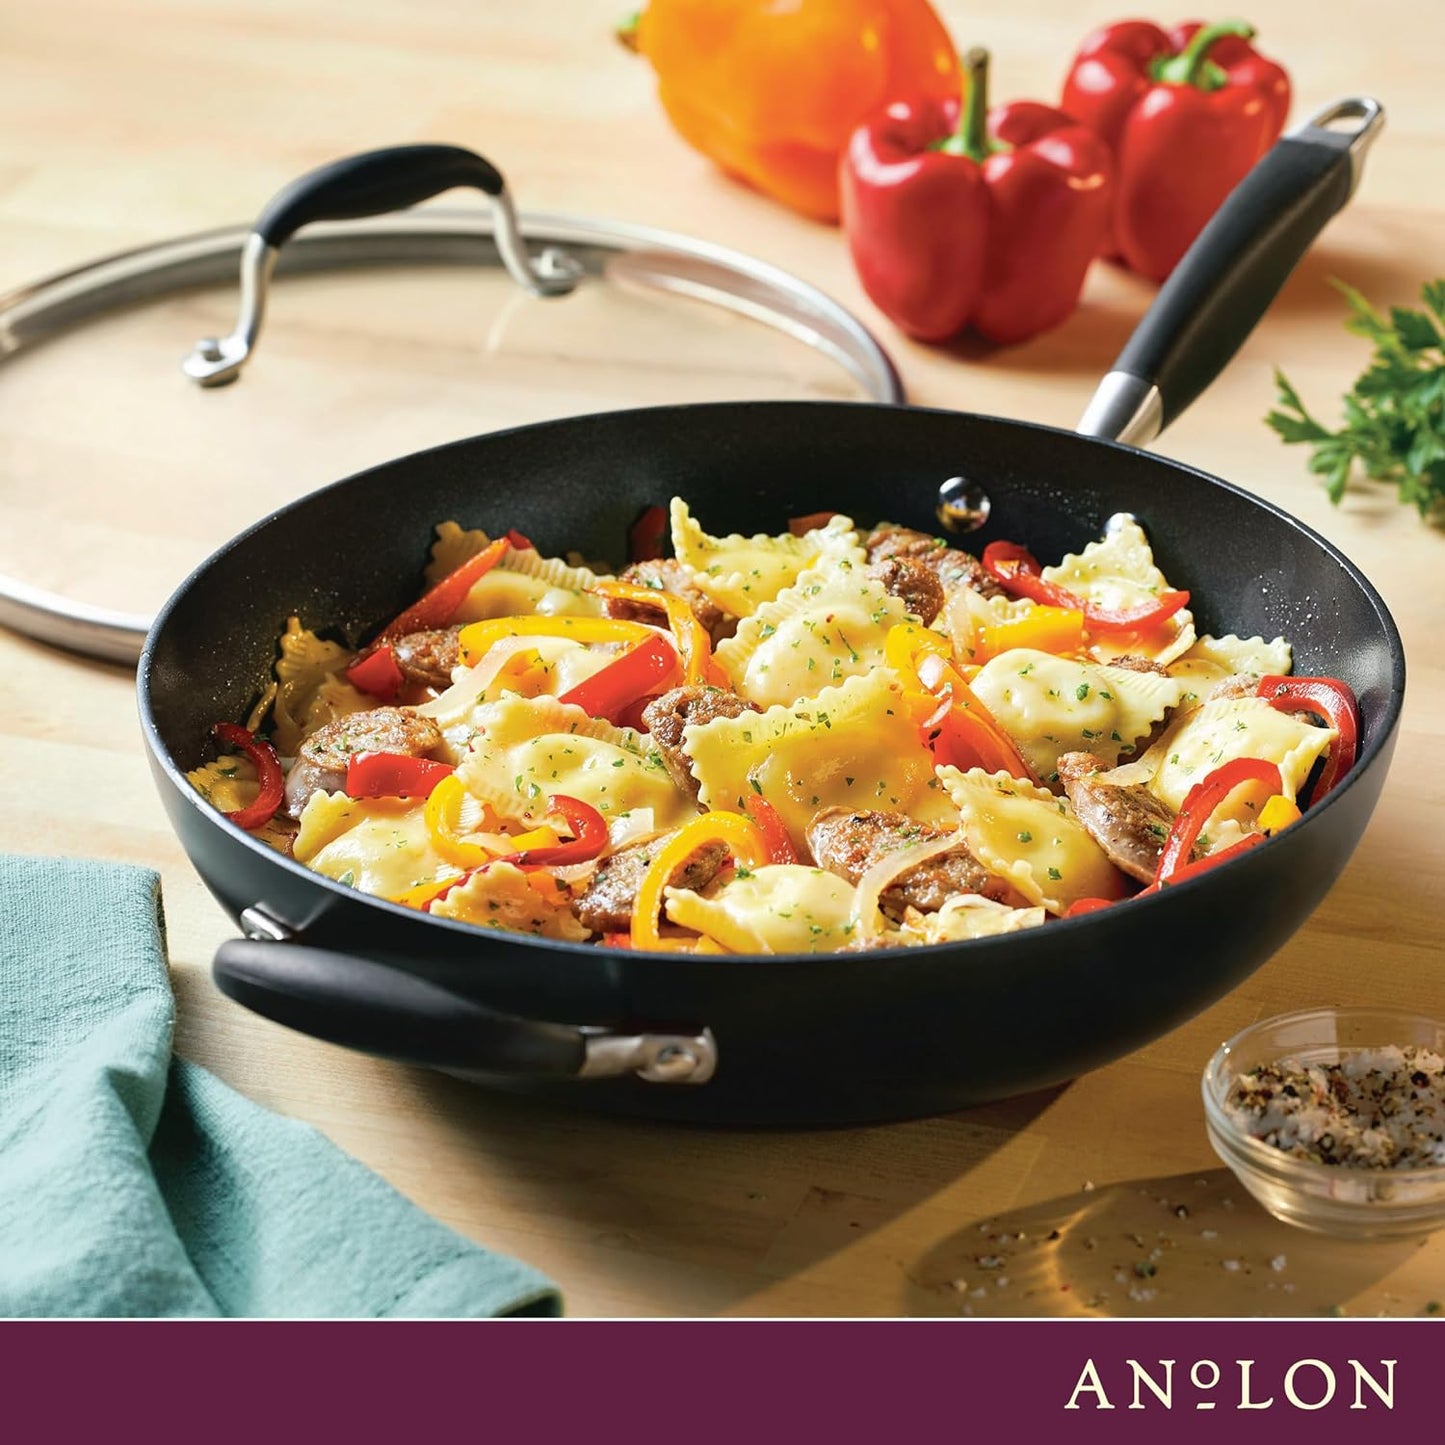 Anolon Advanced Home Hard Anodized Nonstick Deep Frying Pan\/Skillet with Lid, 12 Inch, Onyx